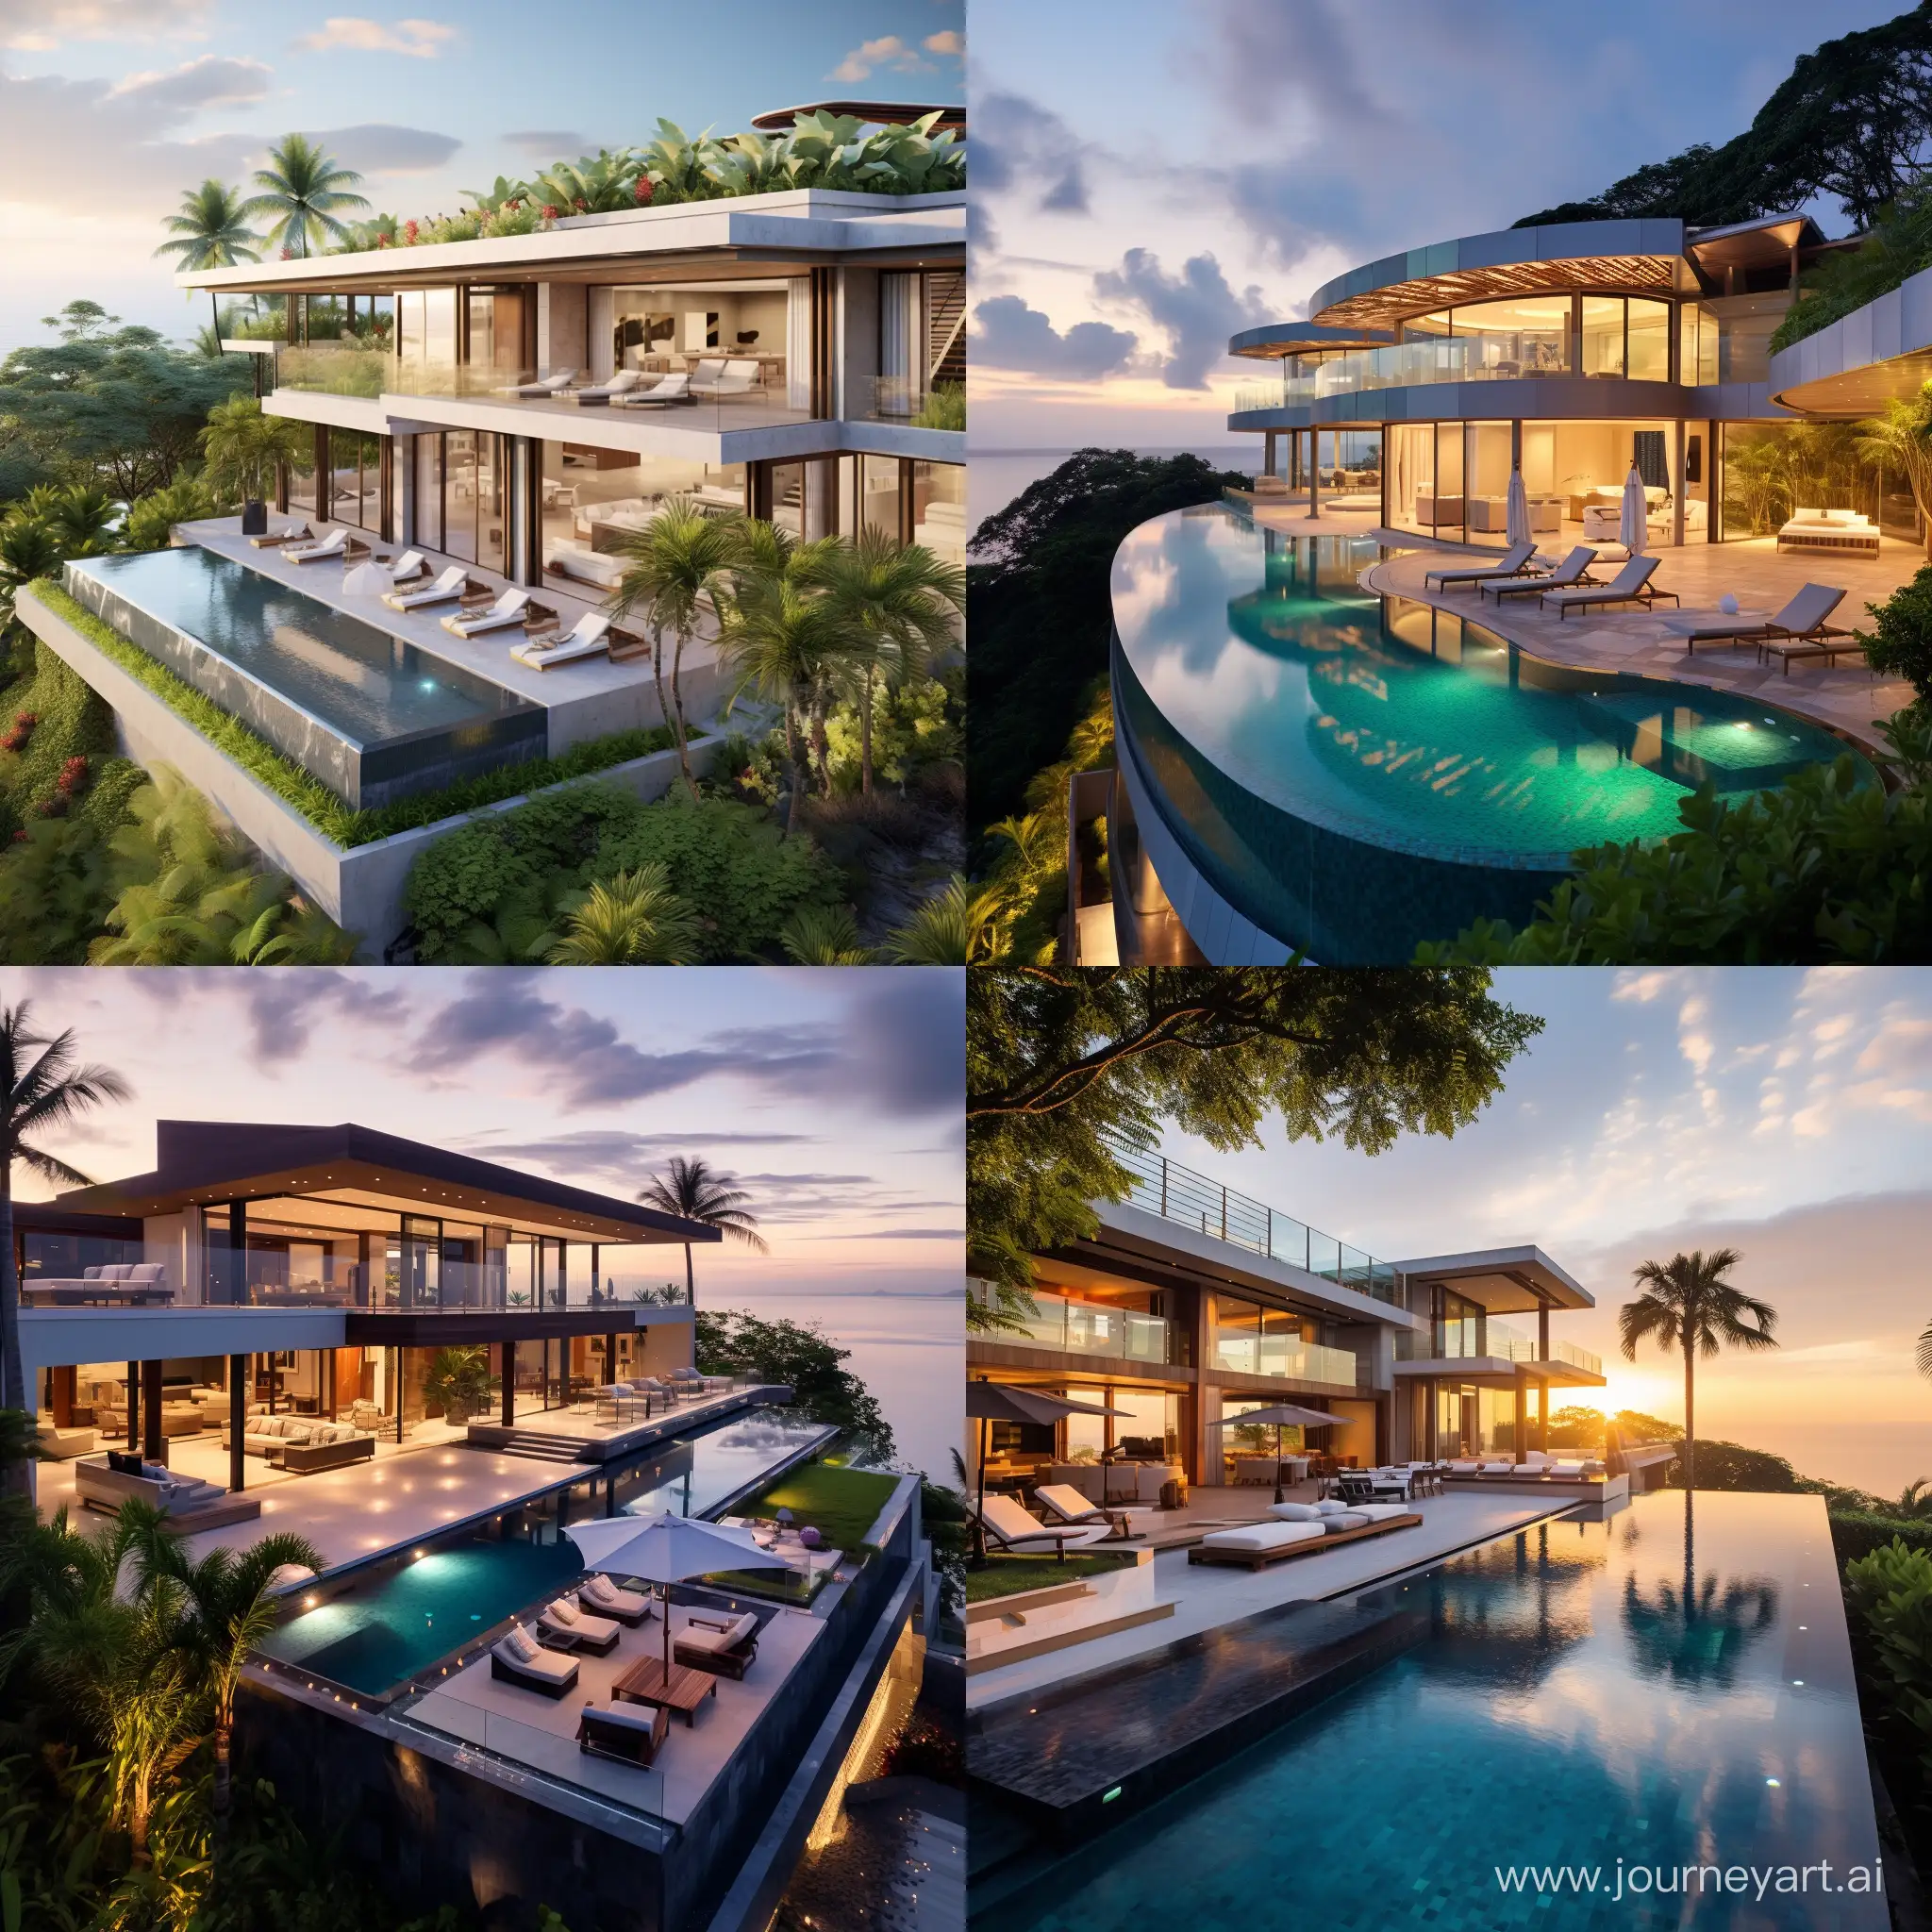 A breathtaking luxury villa, an architectural masterpiece amid lush, manicured gardens and trees. The villa's design is modern contemporary and elegant.
floor-to-ceiling glass walls that frame breathtaking panoramic views of the turquoise infinity pool. seamless integration of indoor and outdoor spaces.
terrace overlooking a private infinity pool.  a magical haven, with strategically placed lighting accentuating the architectural details and casting a warm glow on the surroundings. The outdoor lounge areas, equipped with plush seating and a fire pit, provide the perfect setting for enjoying cocktails under the stars. photo taken at the golden hour.